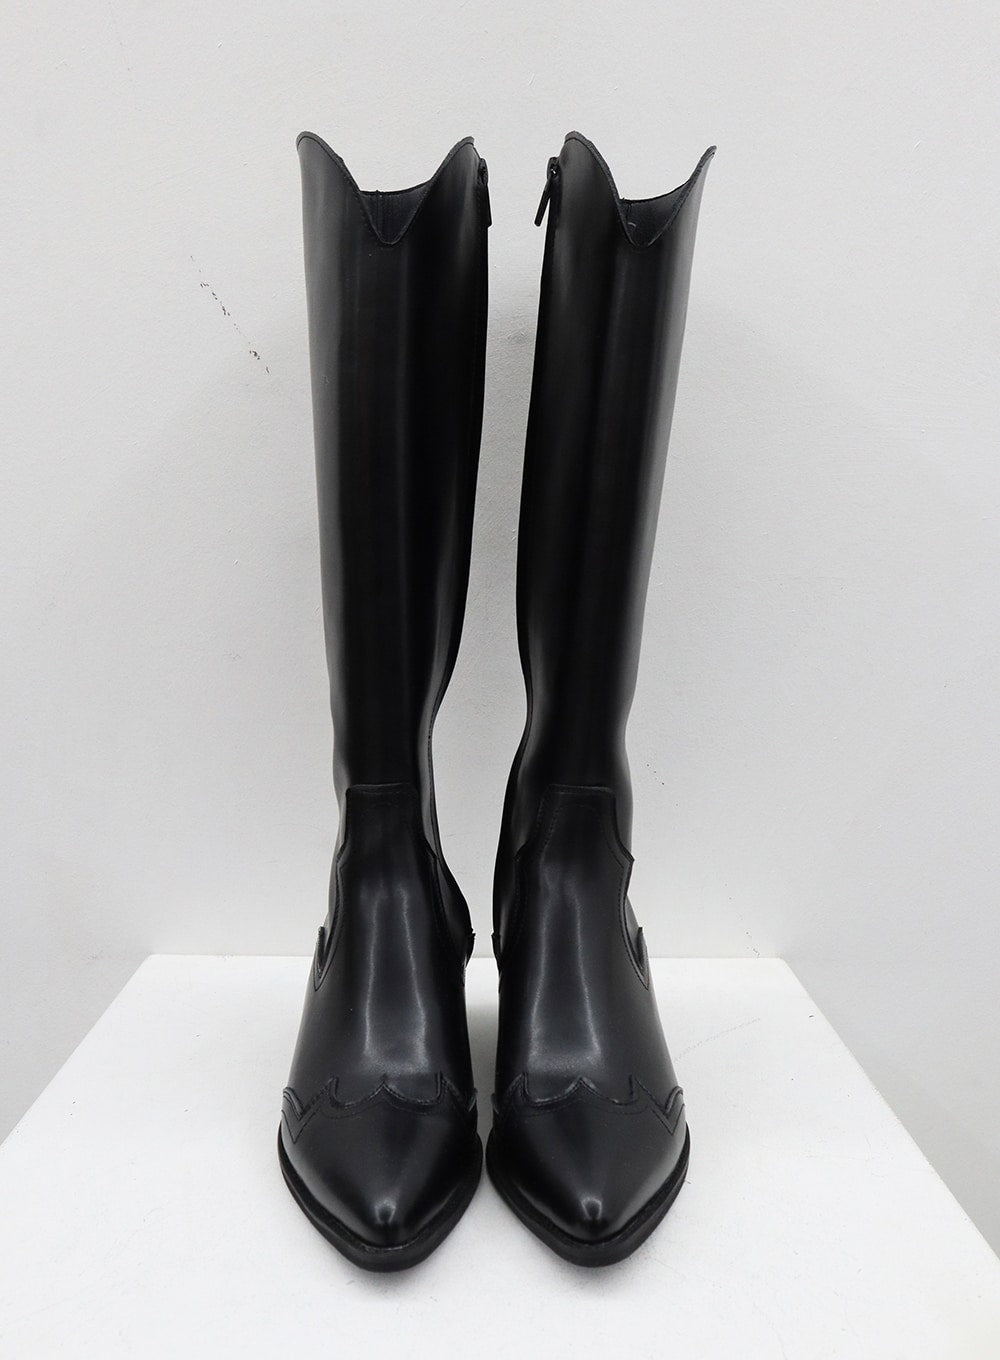 Western Knee High Boots BJ331